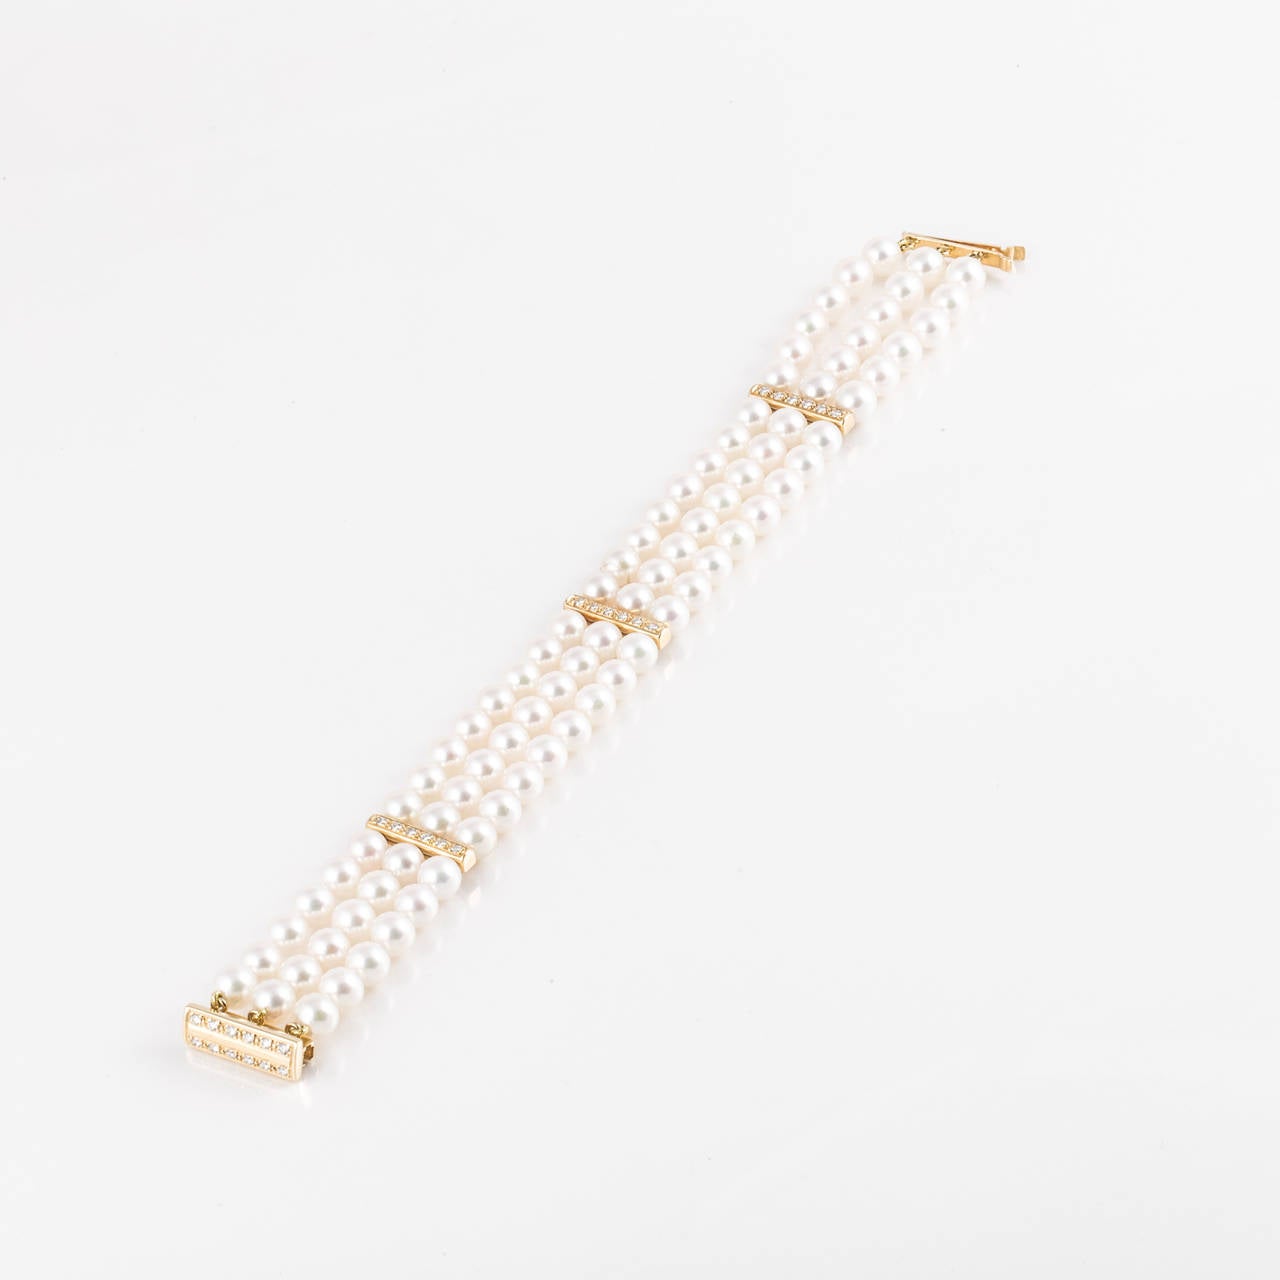 Beautiful three-strand cultured pearl bracelet.  Made by Mikimoto with the clasp showing the 